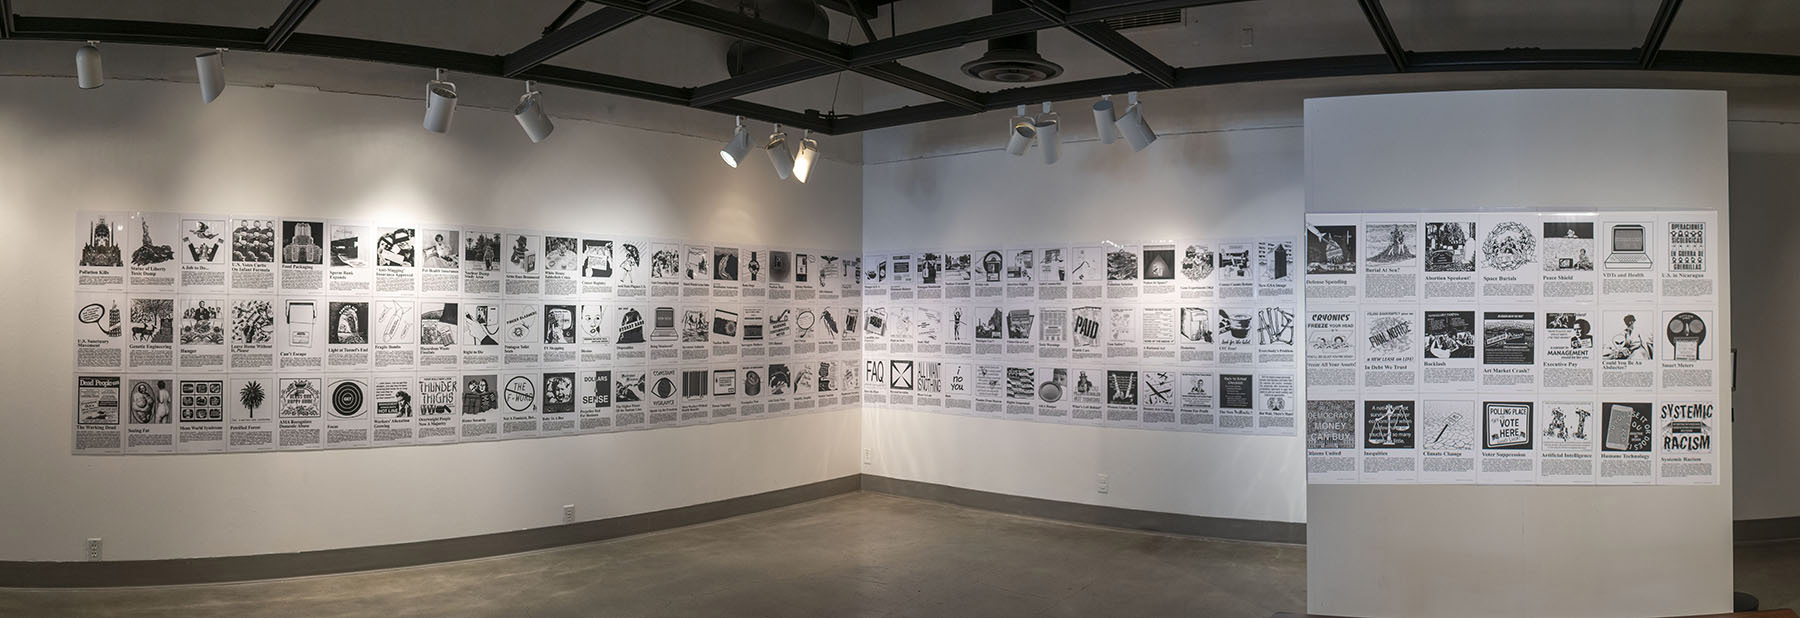 Installation View, Back of Gallery, Black, White & Shades of Grey Exhibition, Jan. 18, 2022 to Mar. 27, 2022.